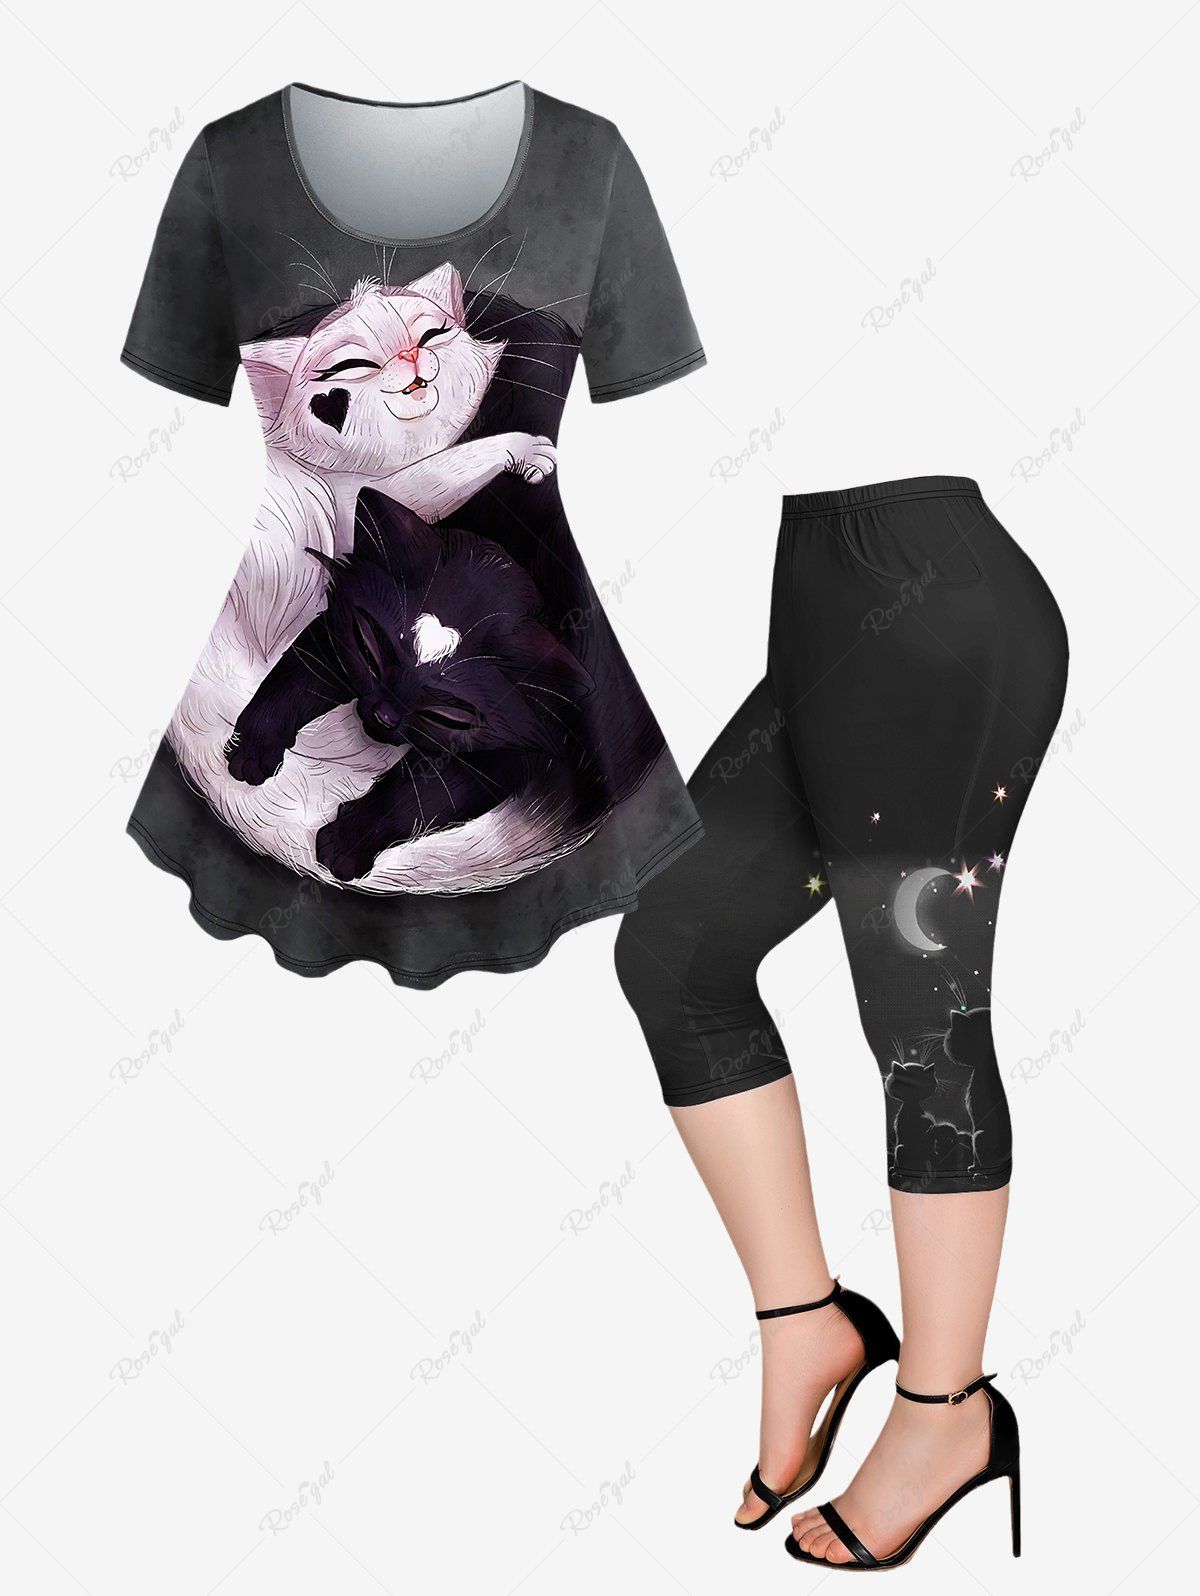 Sale Plus Size Cats Printed Short Sleeves T-shirt and Pockets Capri Leggings Outfit  